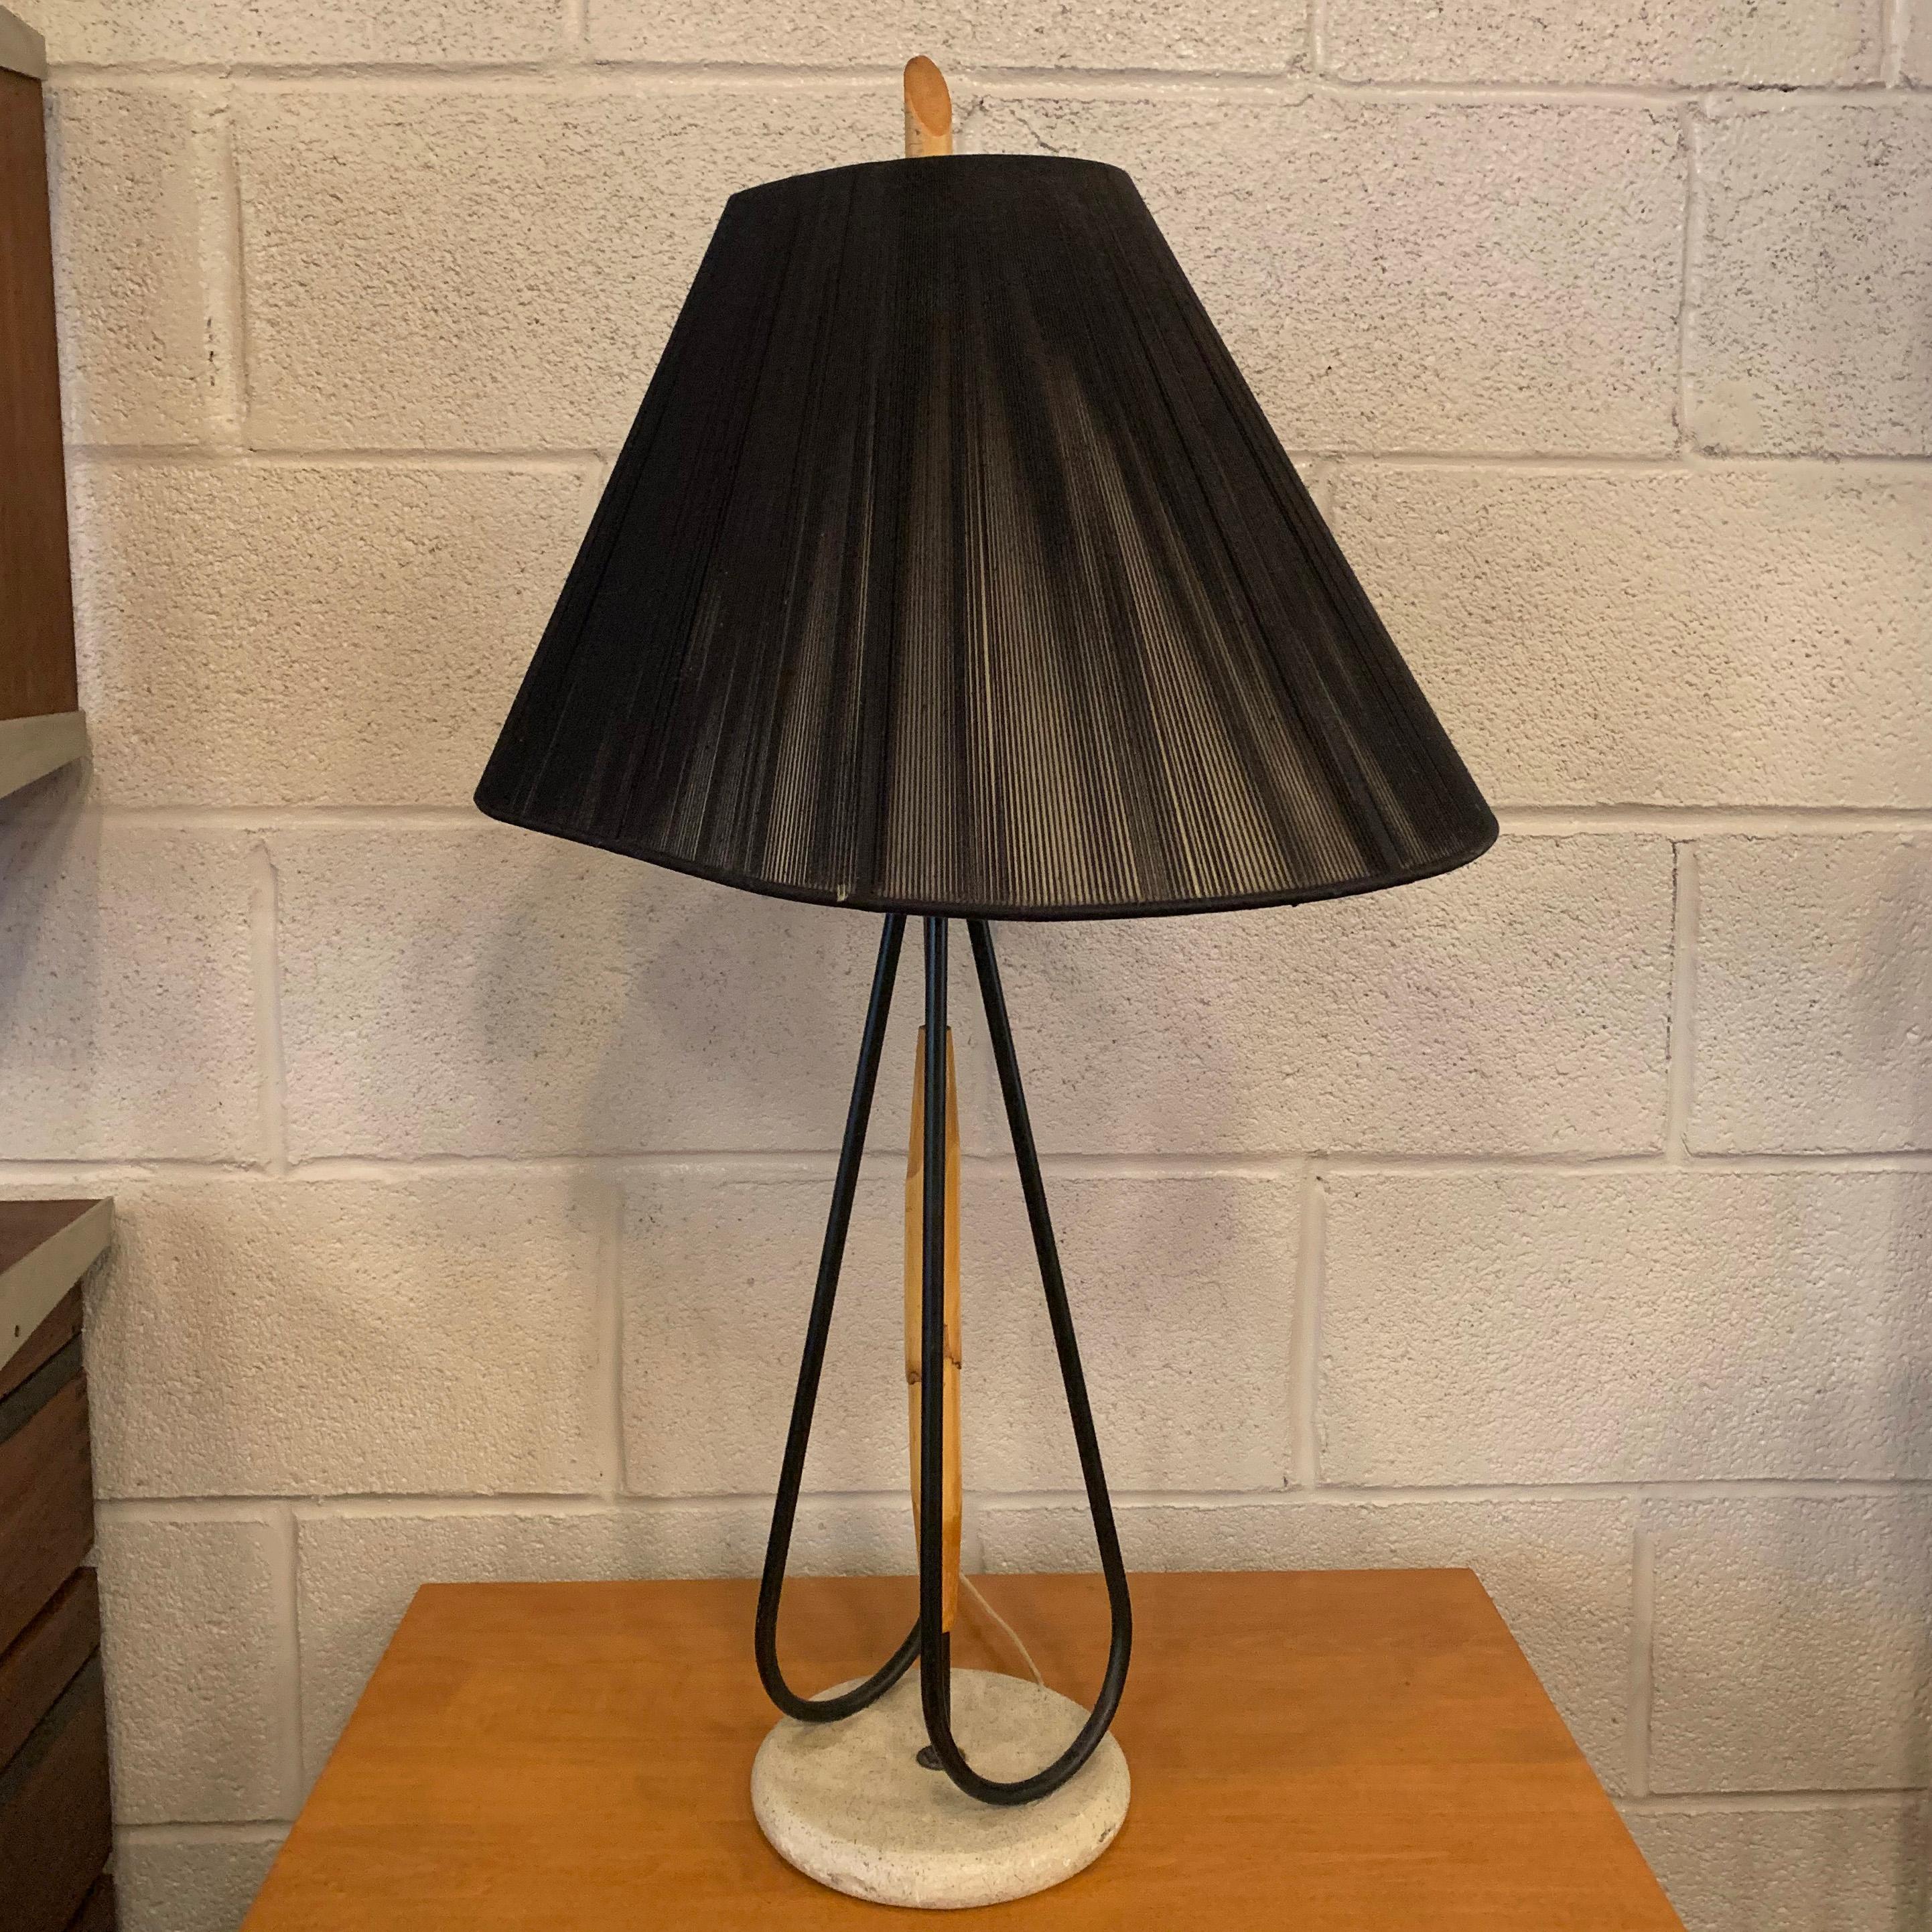 American Mid-Century Modern Bamboo Table Lamp with String Shade